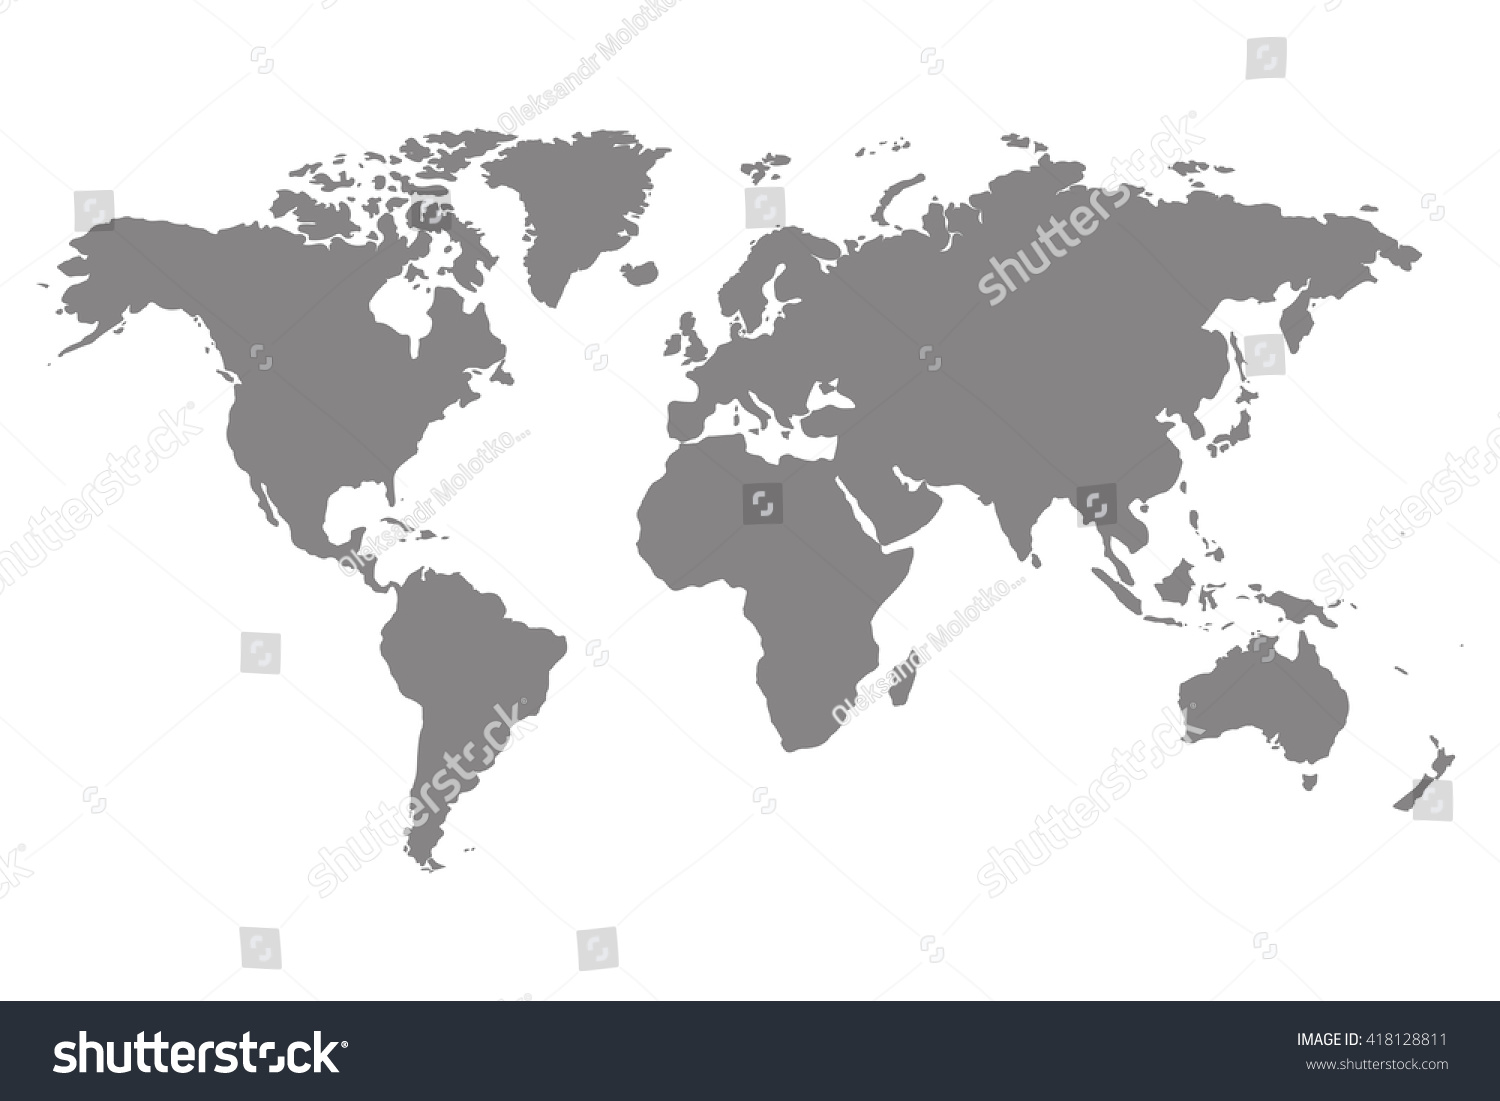 Gray blank vector world map. Isolated on white background. #418128811